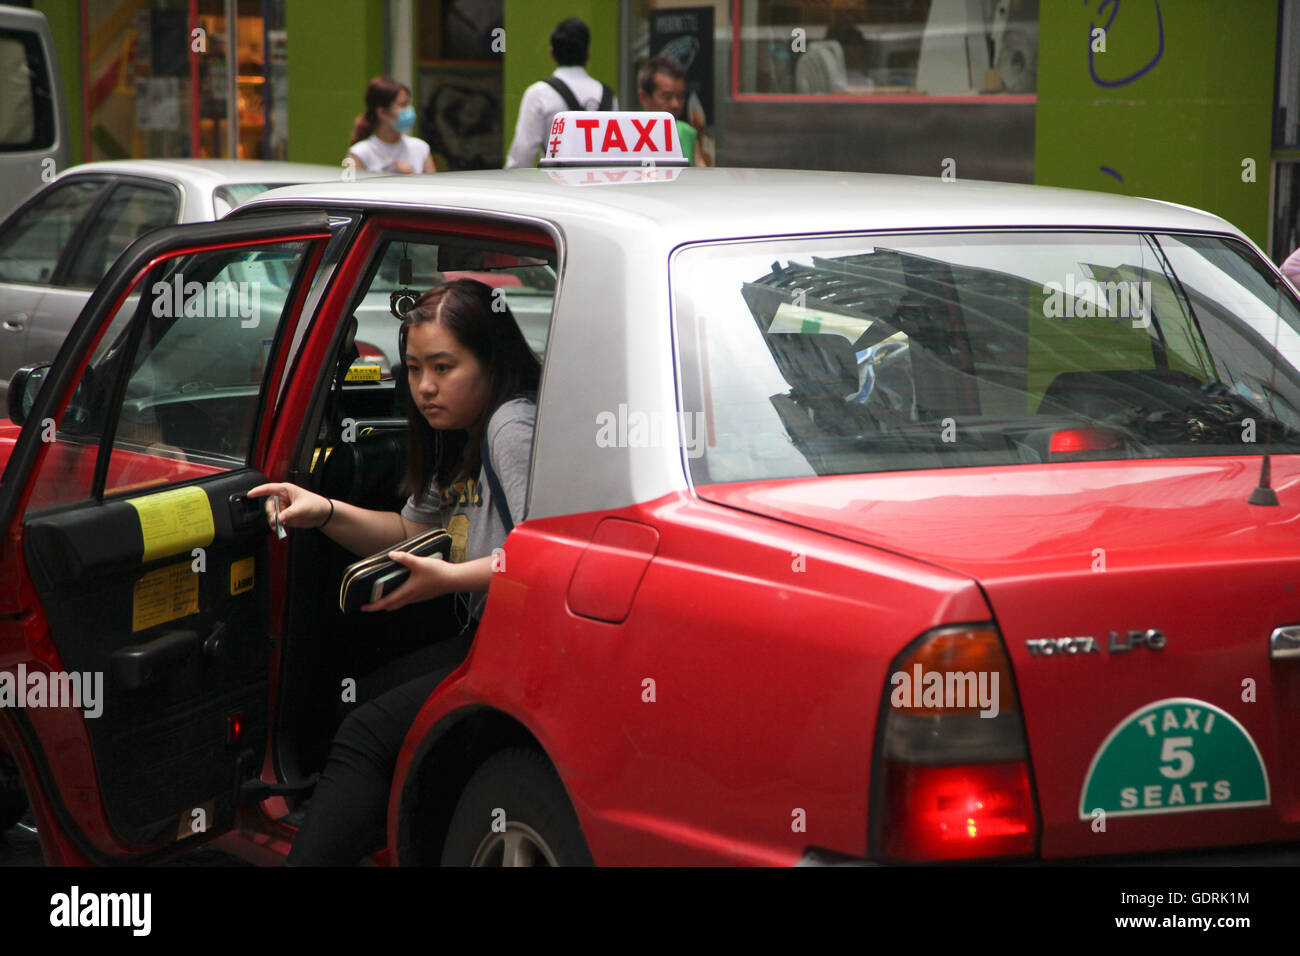 A woman getting out of a red Hong Kong taxi in Central District of Hong Kong. Stock Photo